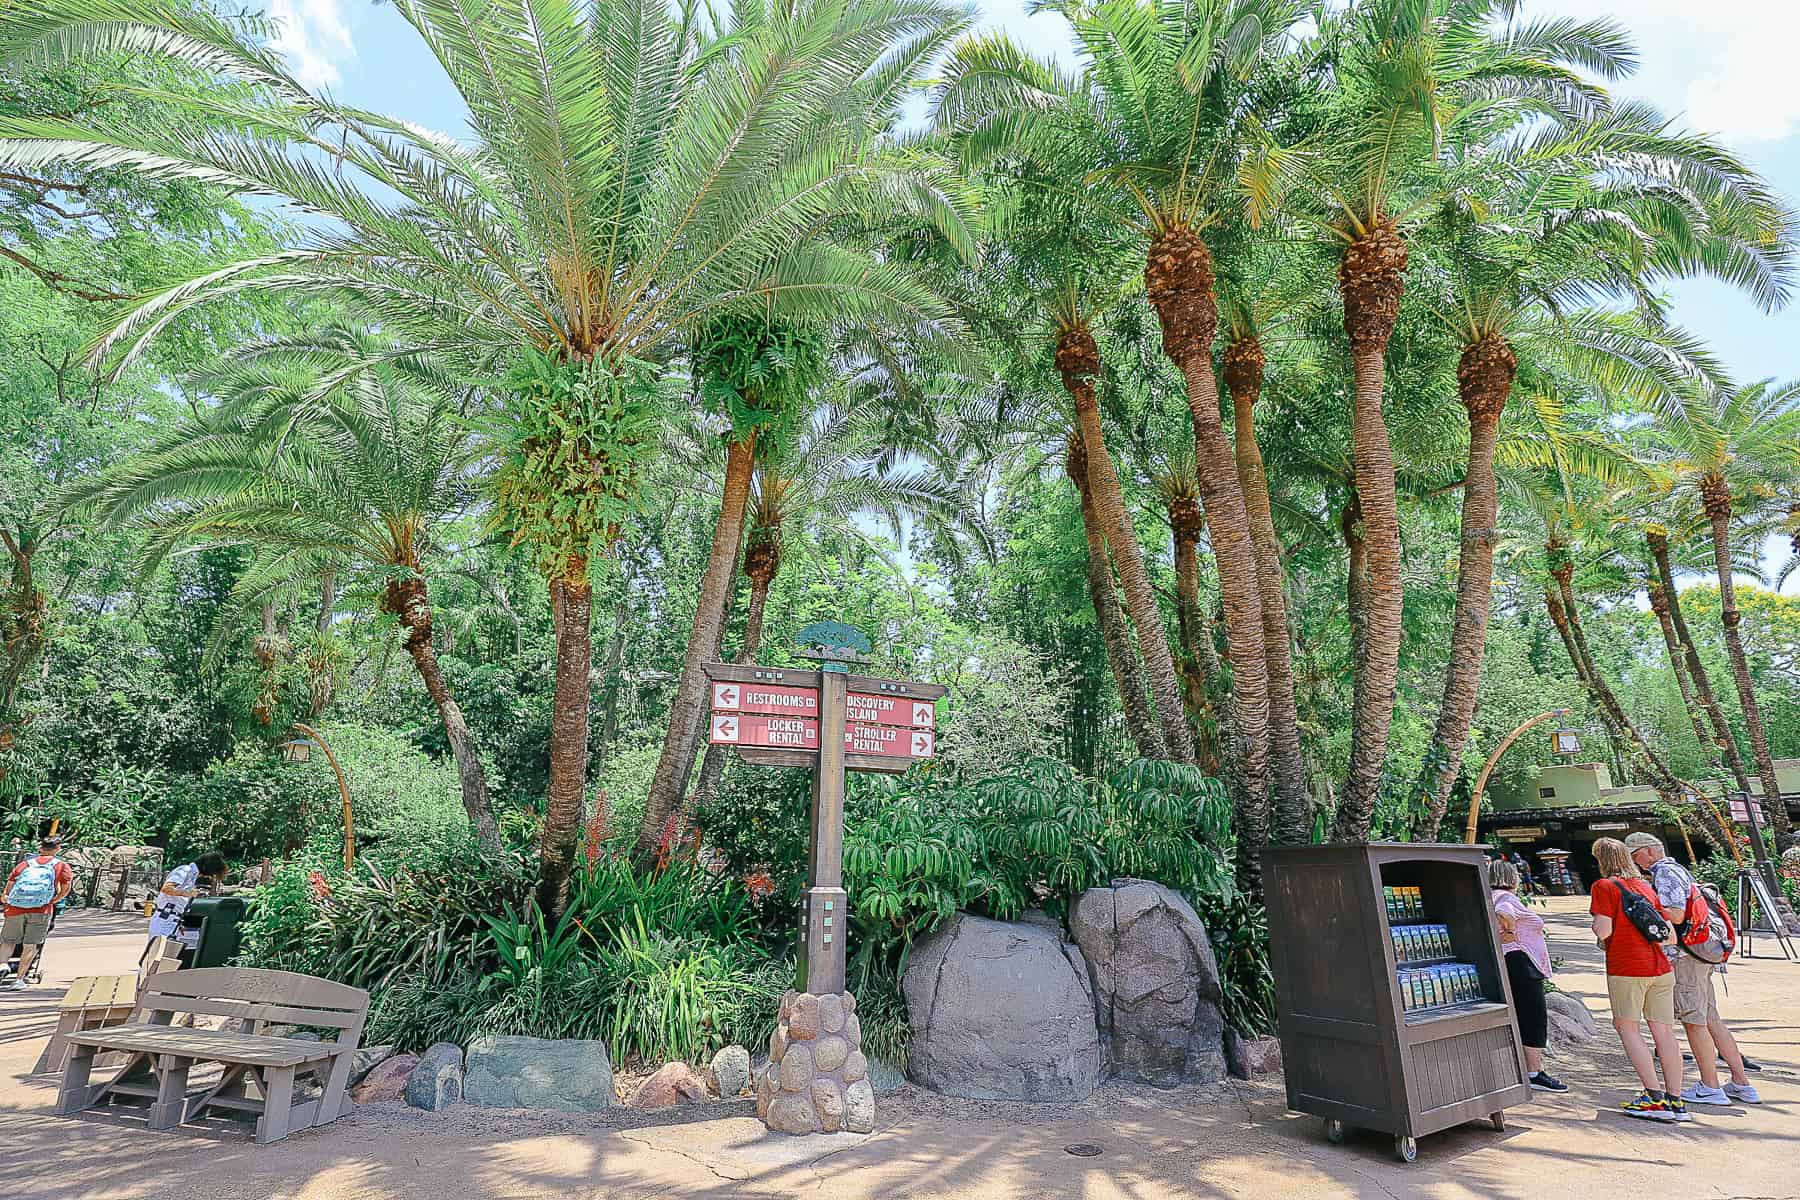 a walkway to the left or the right both lead through The Oasis exhibits at Disney's Animal Kingdom 